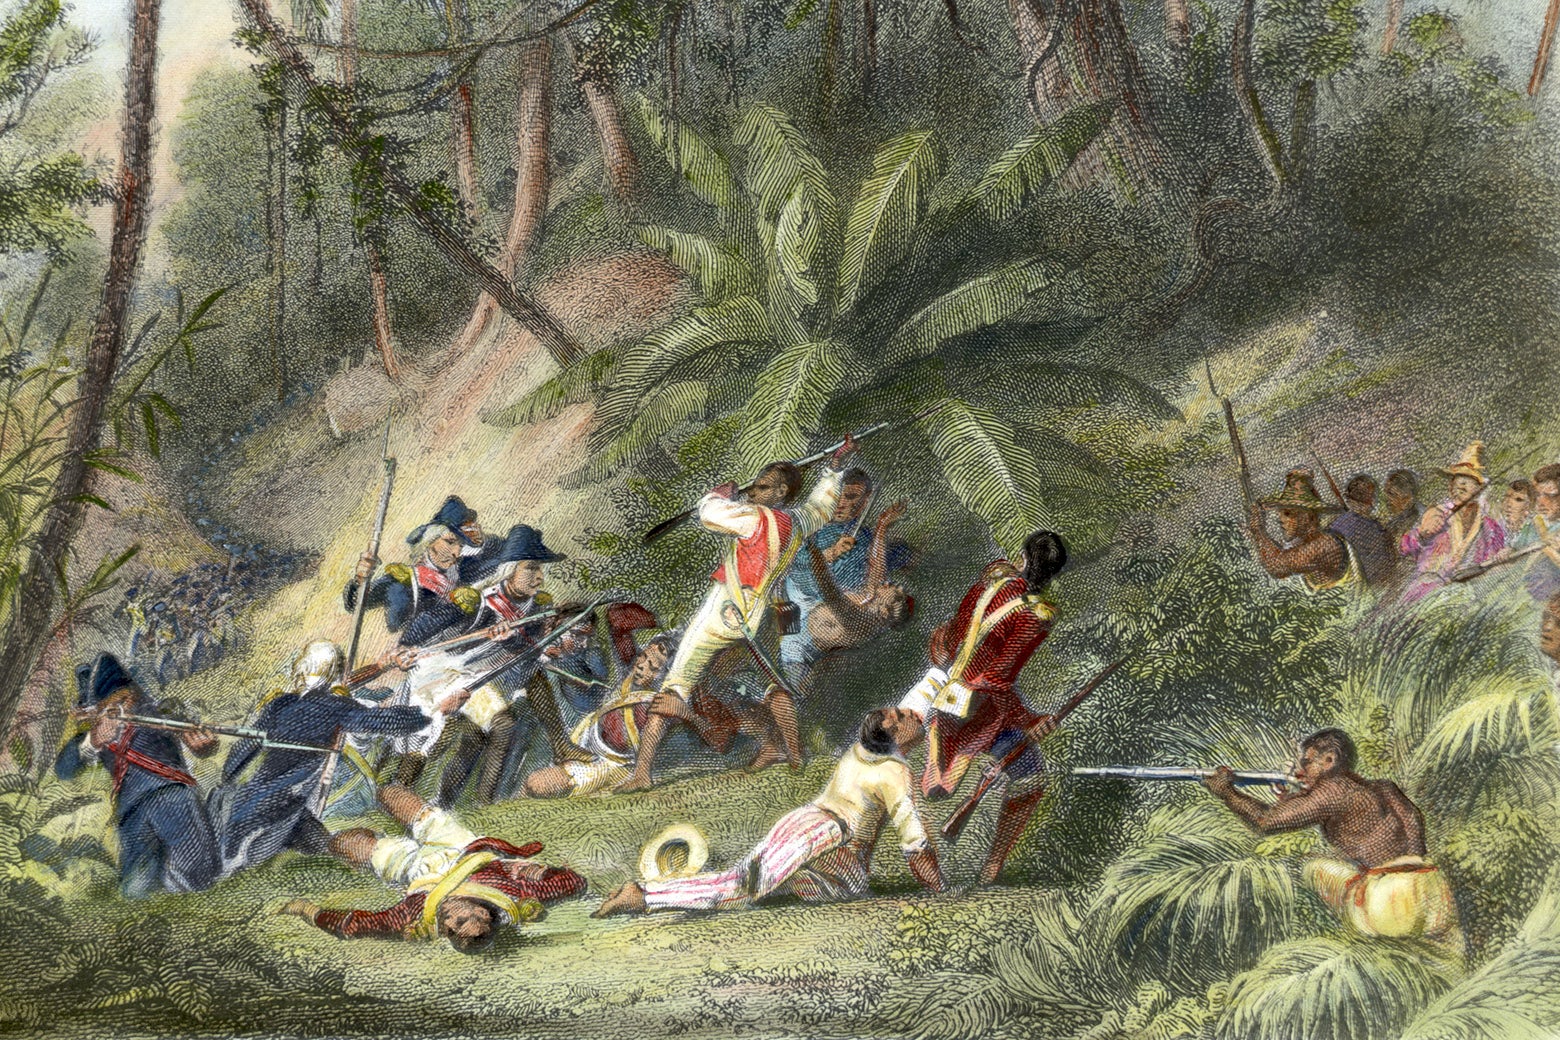 An illustration of Toussaint L'Ouverture fighting off French soldiers